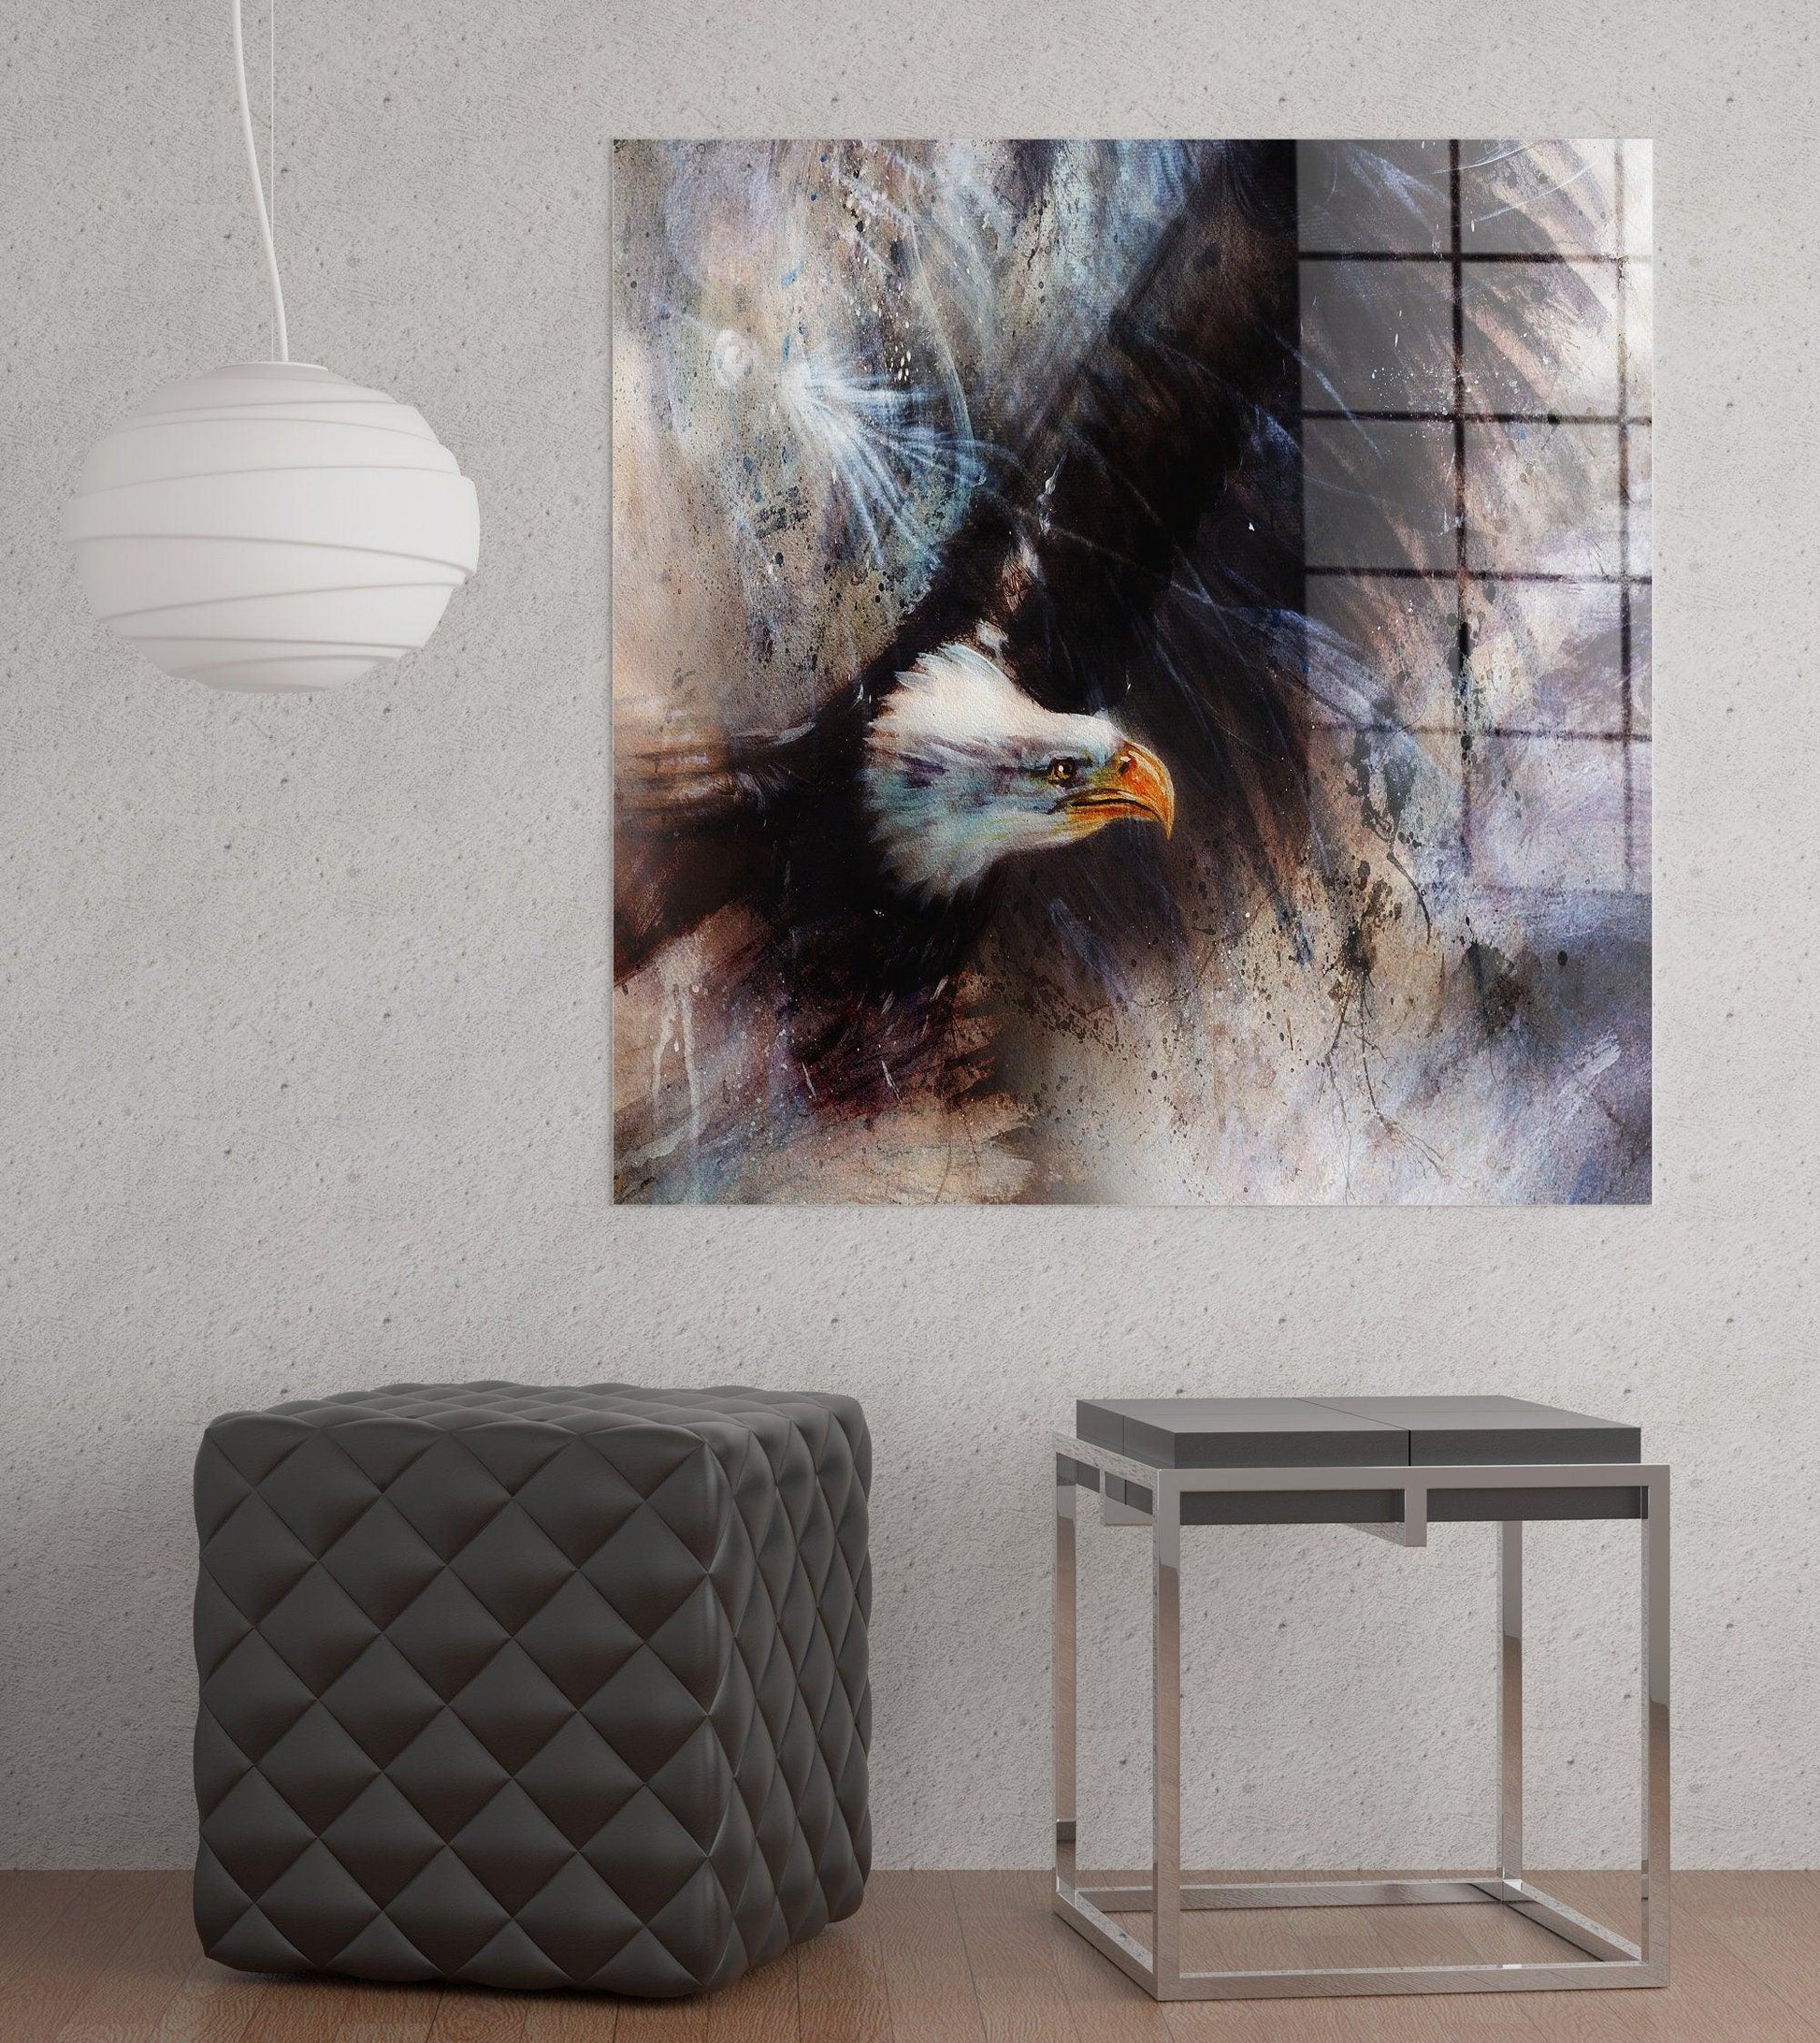 Abstract Eagle Printed glass wall art| gift for new home, Eagle wall decor, Eagle poster, home decor artwork, New Home Housewarming